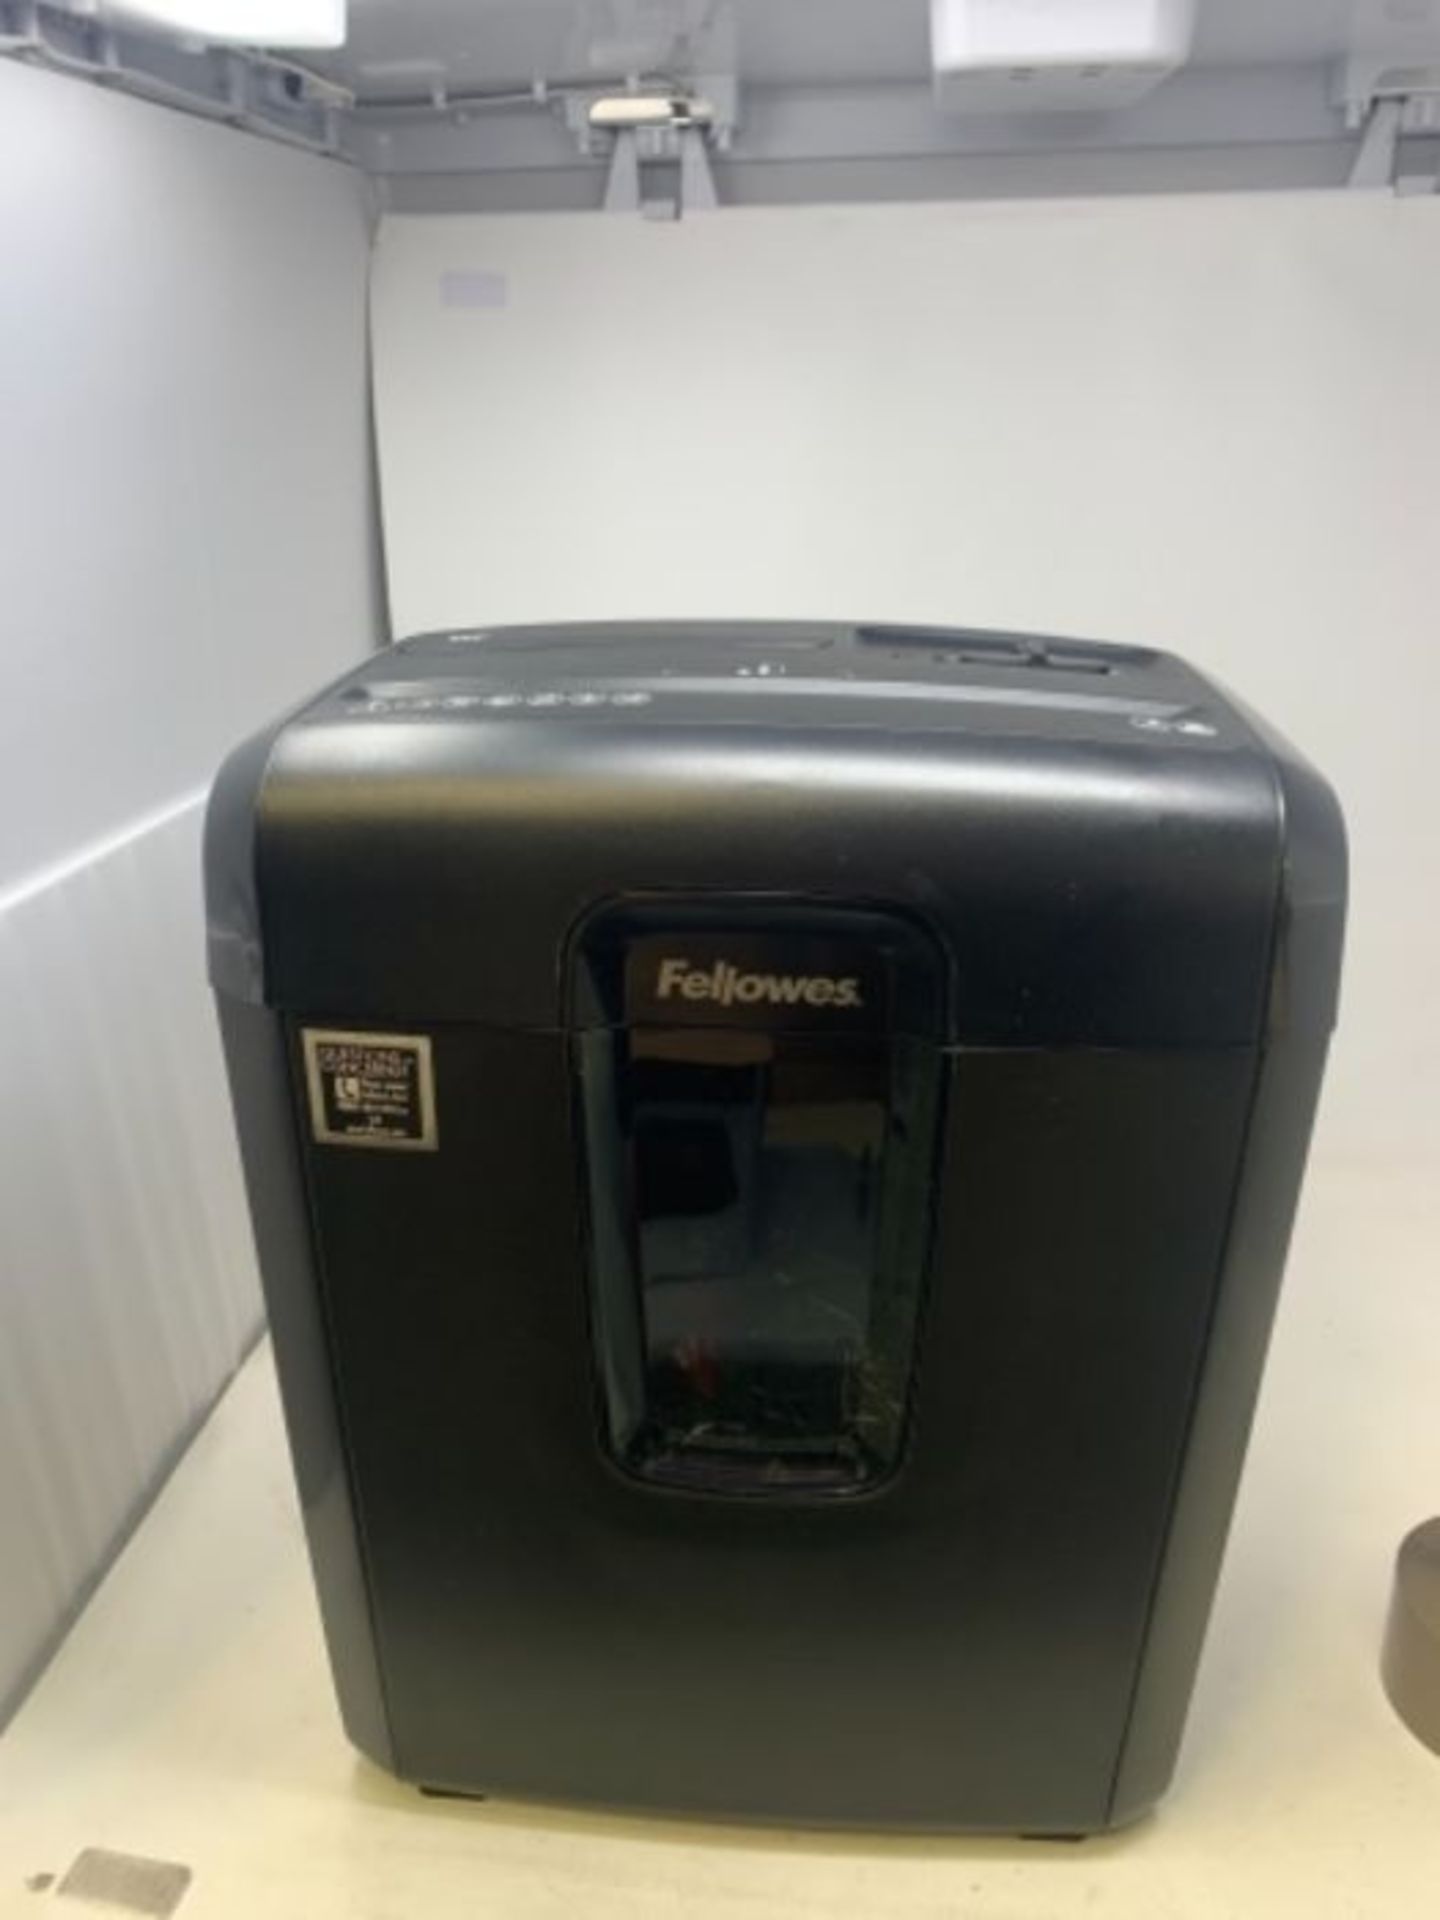 Fellowes Powershred 8C Personal 8 Sheet Cross Cut Paper Shredder for Home Use - With S - Image 2 of 2